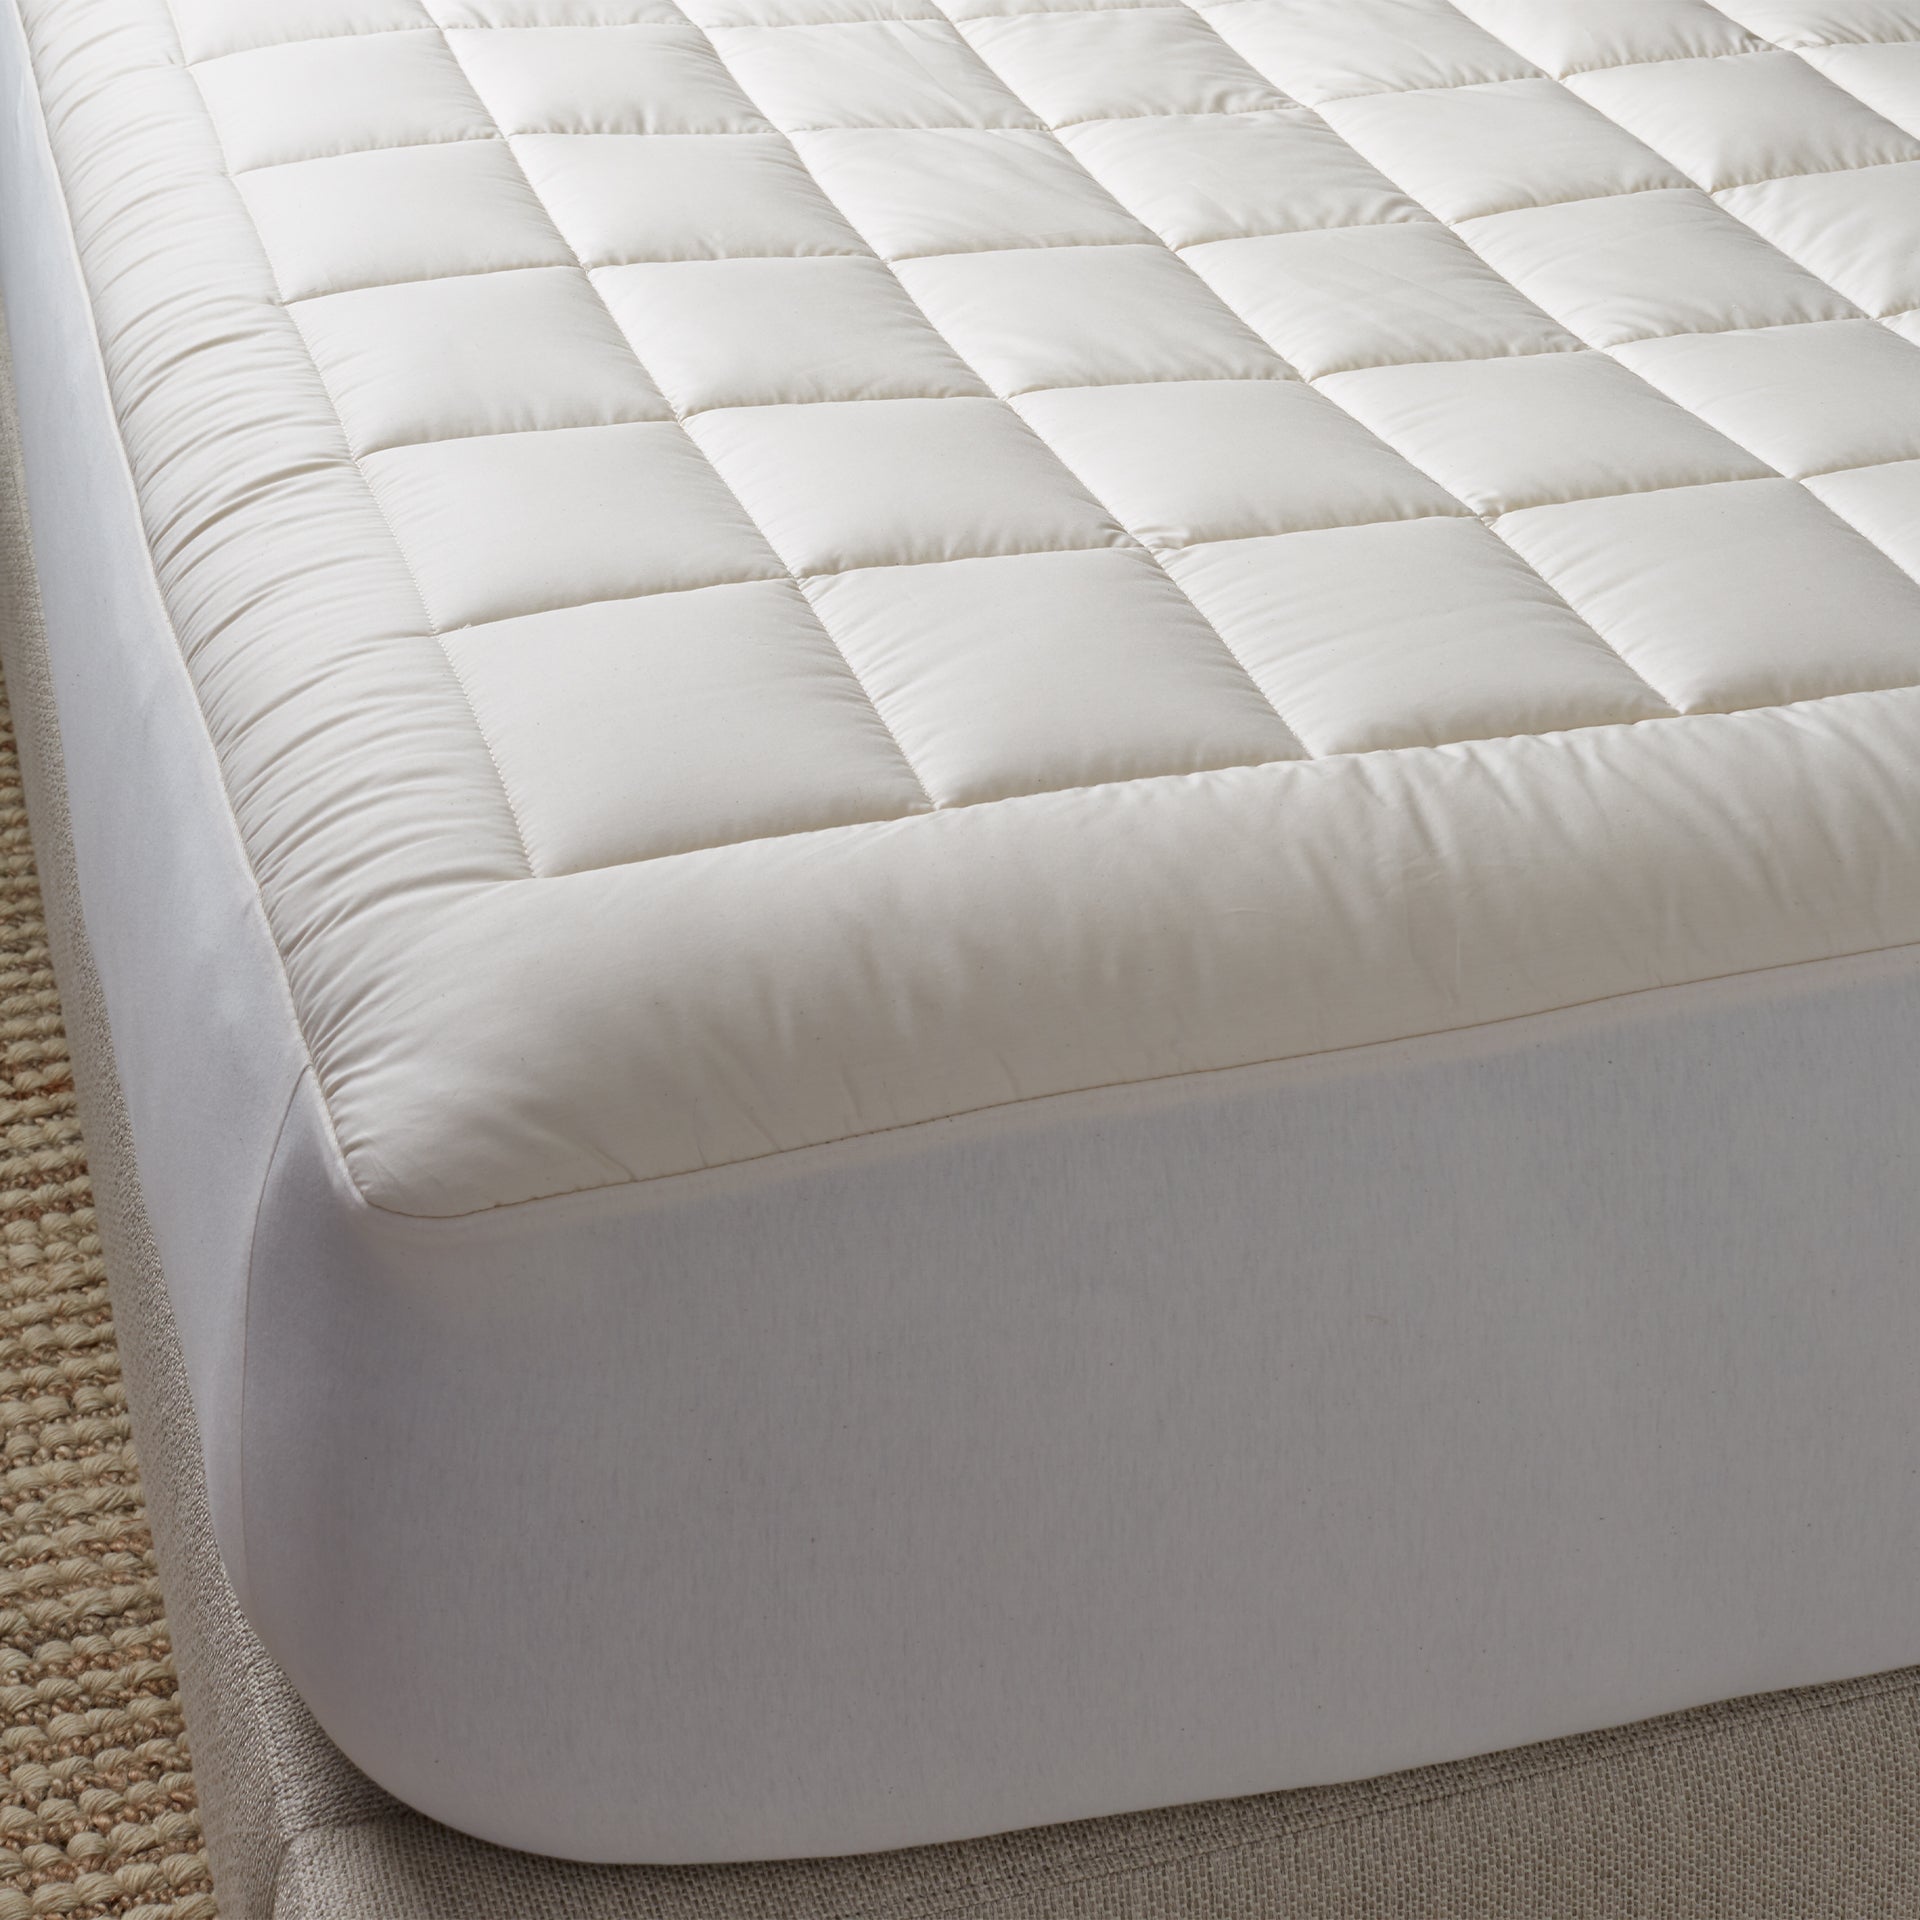 Bio wool mattress pad is perfect for temperture regulating for a comfortable night&#39;s sleep